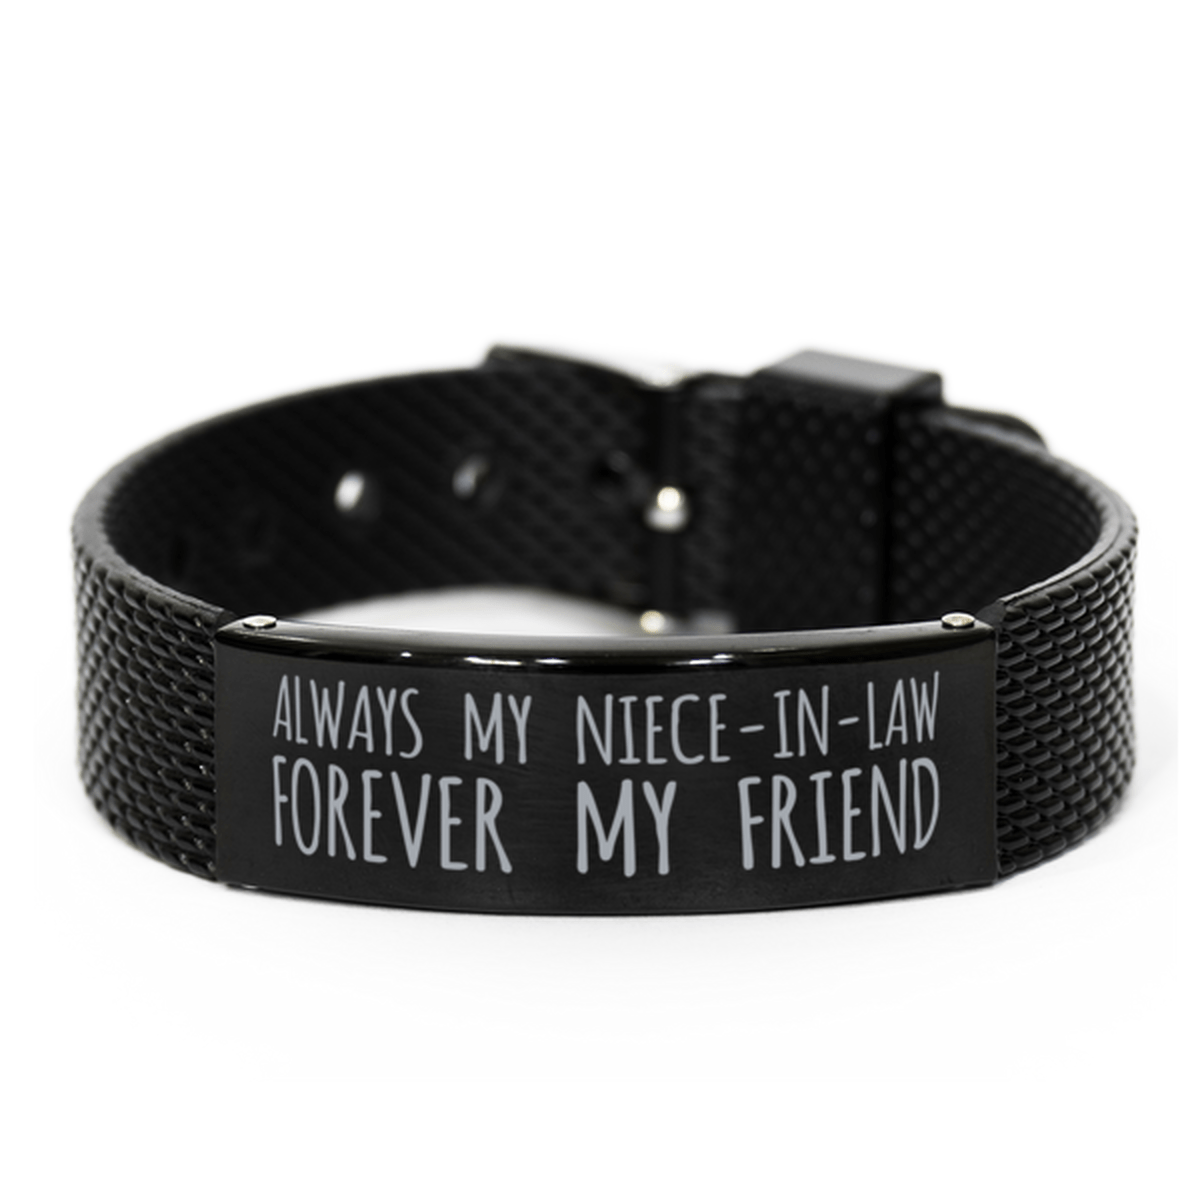 Inspirational Niece-In-Law Black Shark Mesh Bracelet, Always My Niece-In-Law Forever My Friend, Best Birthday Gifts for Family Friends